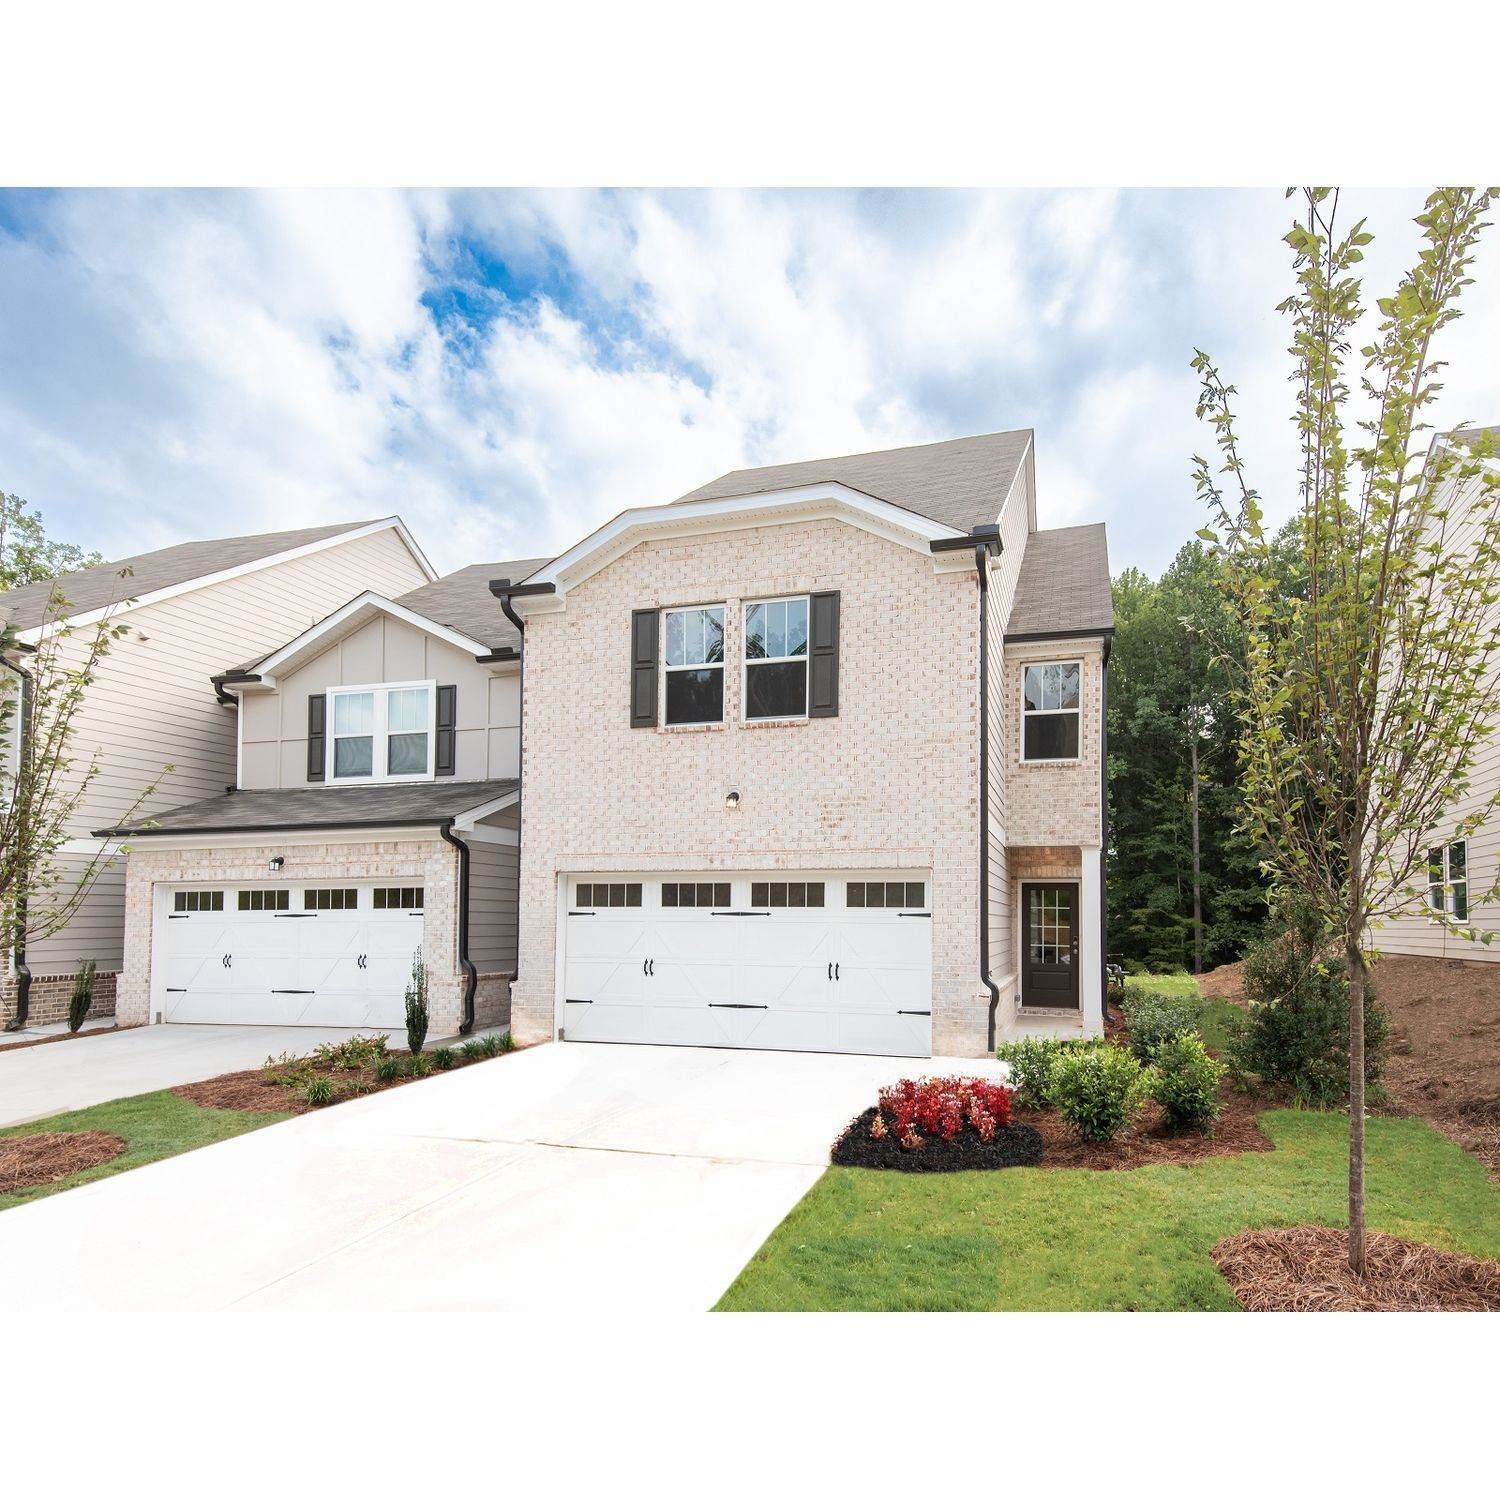 The Woods at Dawson Townhomes building at 163 Magnolia Drive, Dawsonville, GA 30534